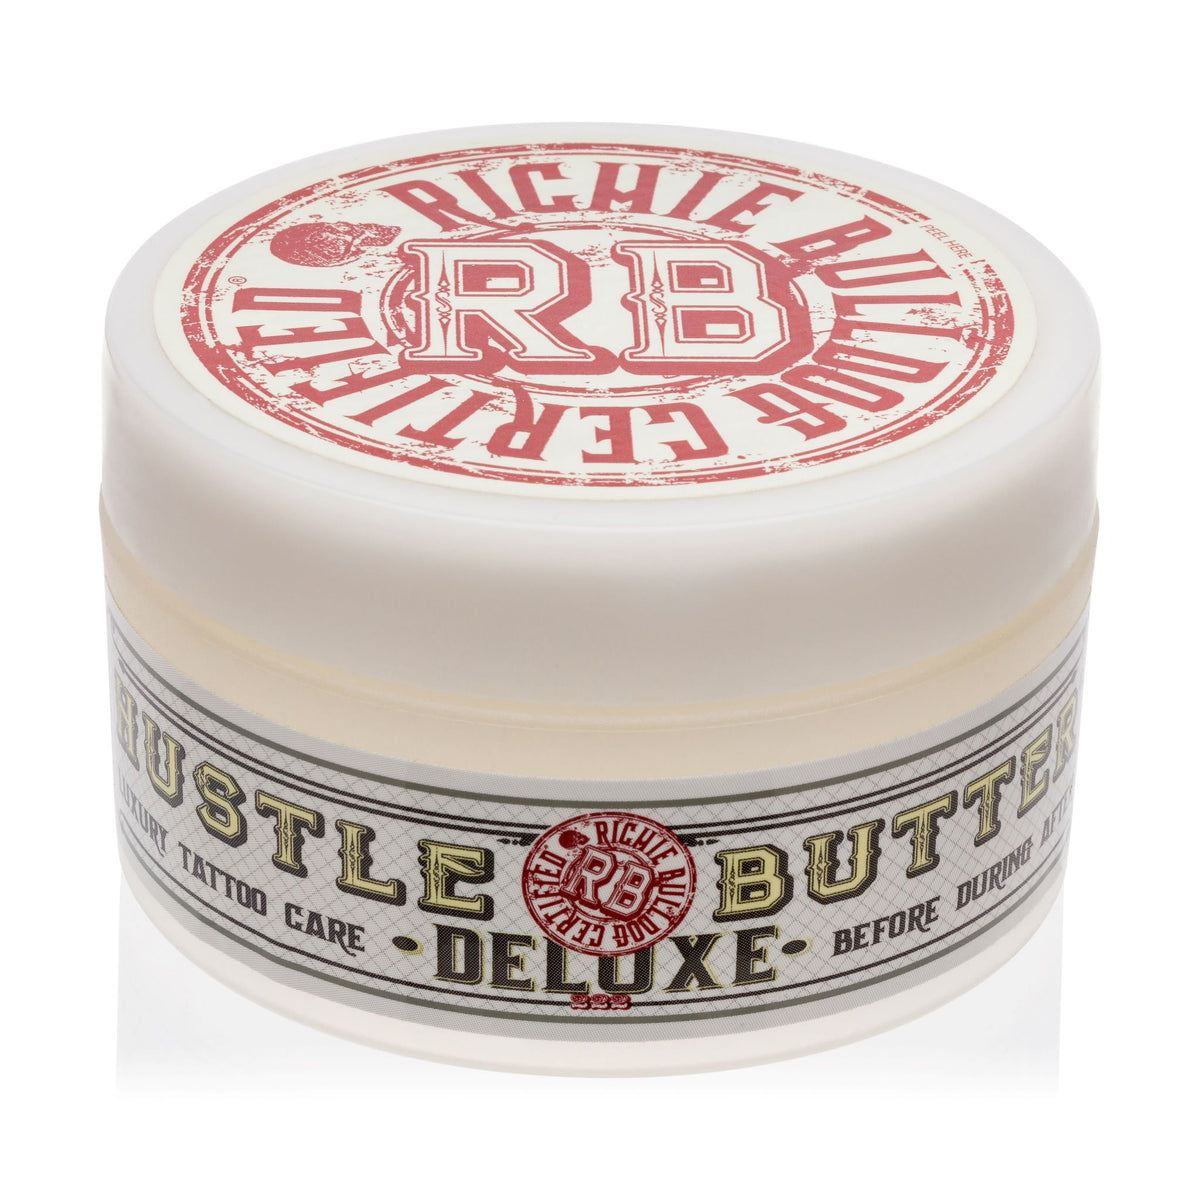 Hustle Butter Deluxe 5 oz Lubricating Moisturizing Vegan Tattoo Butter  for Before During and Aftercare 1 Tub  3 Applicators